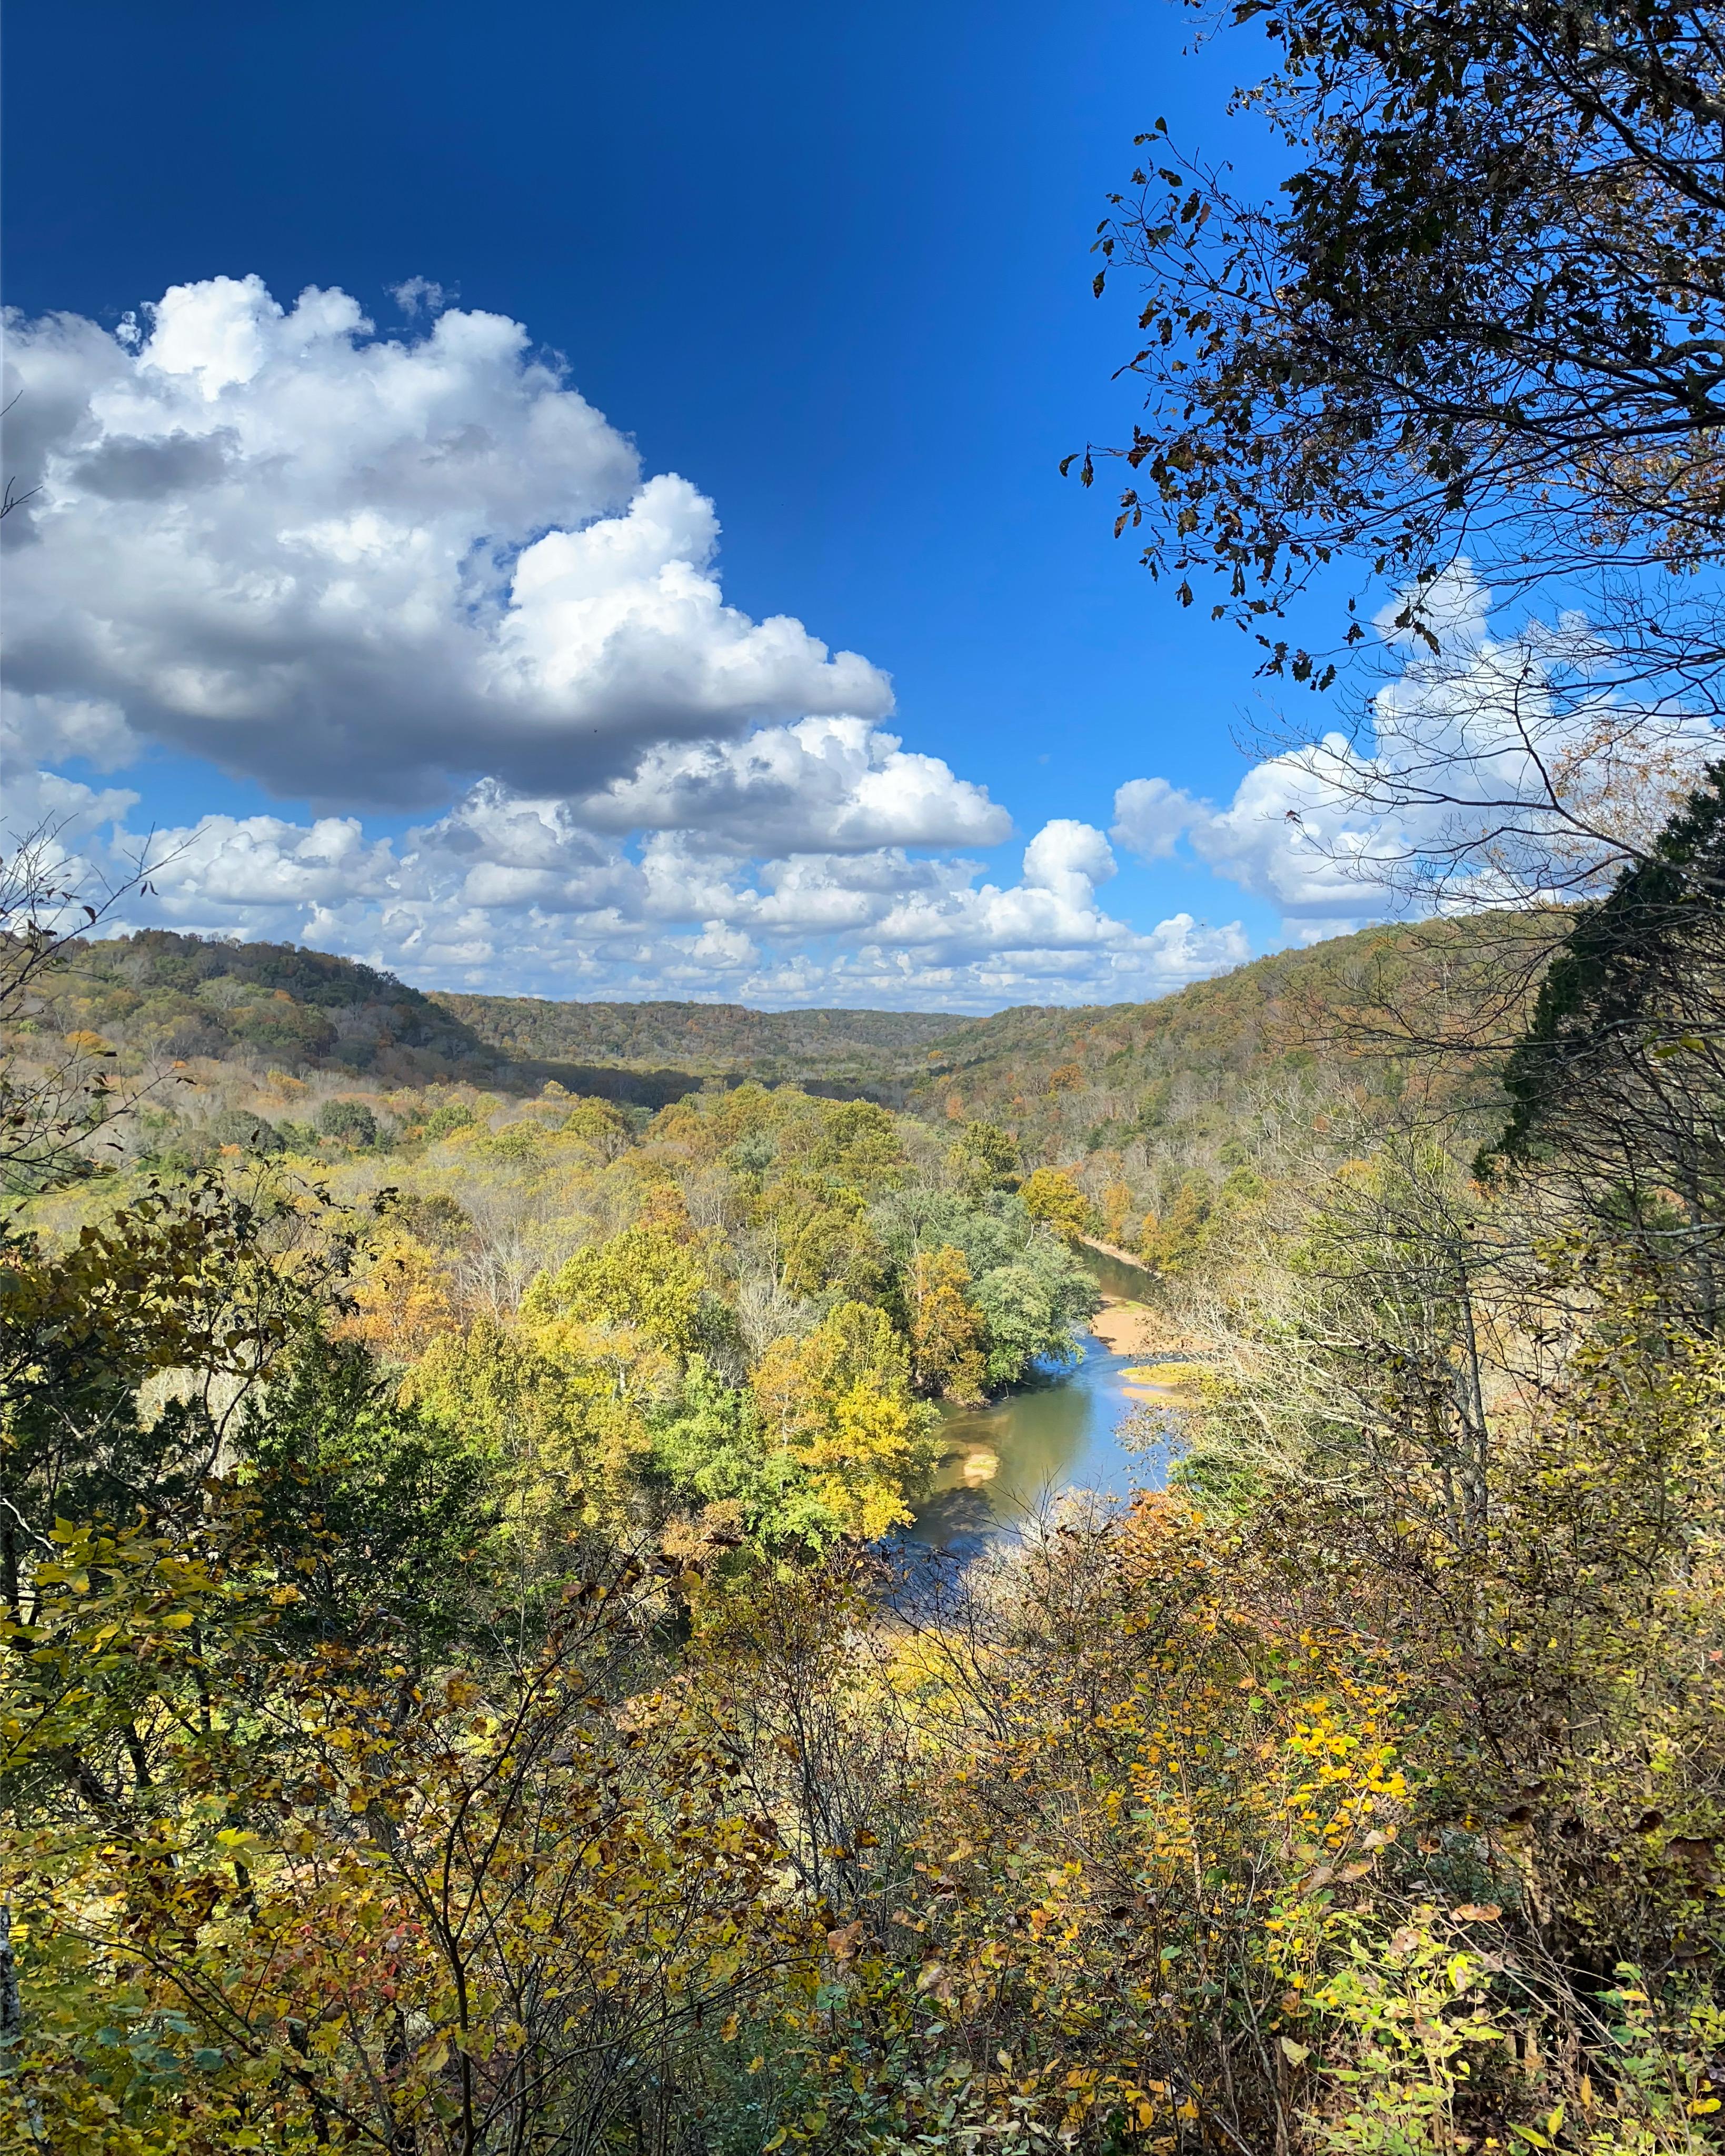 A view of a river valley with hills covered in trees. A blue sky with white clouds stands above.